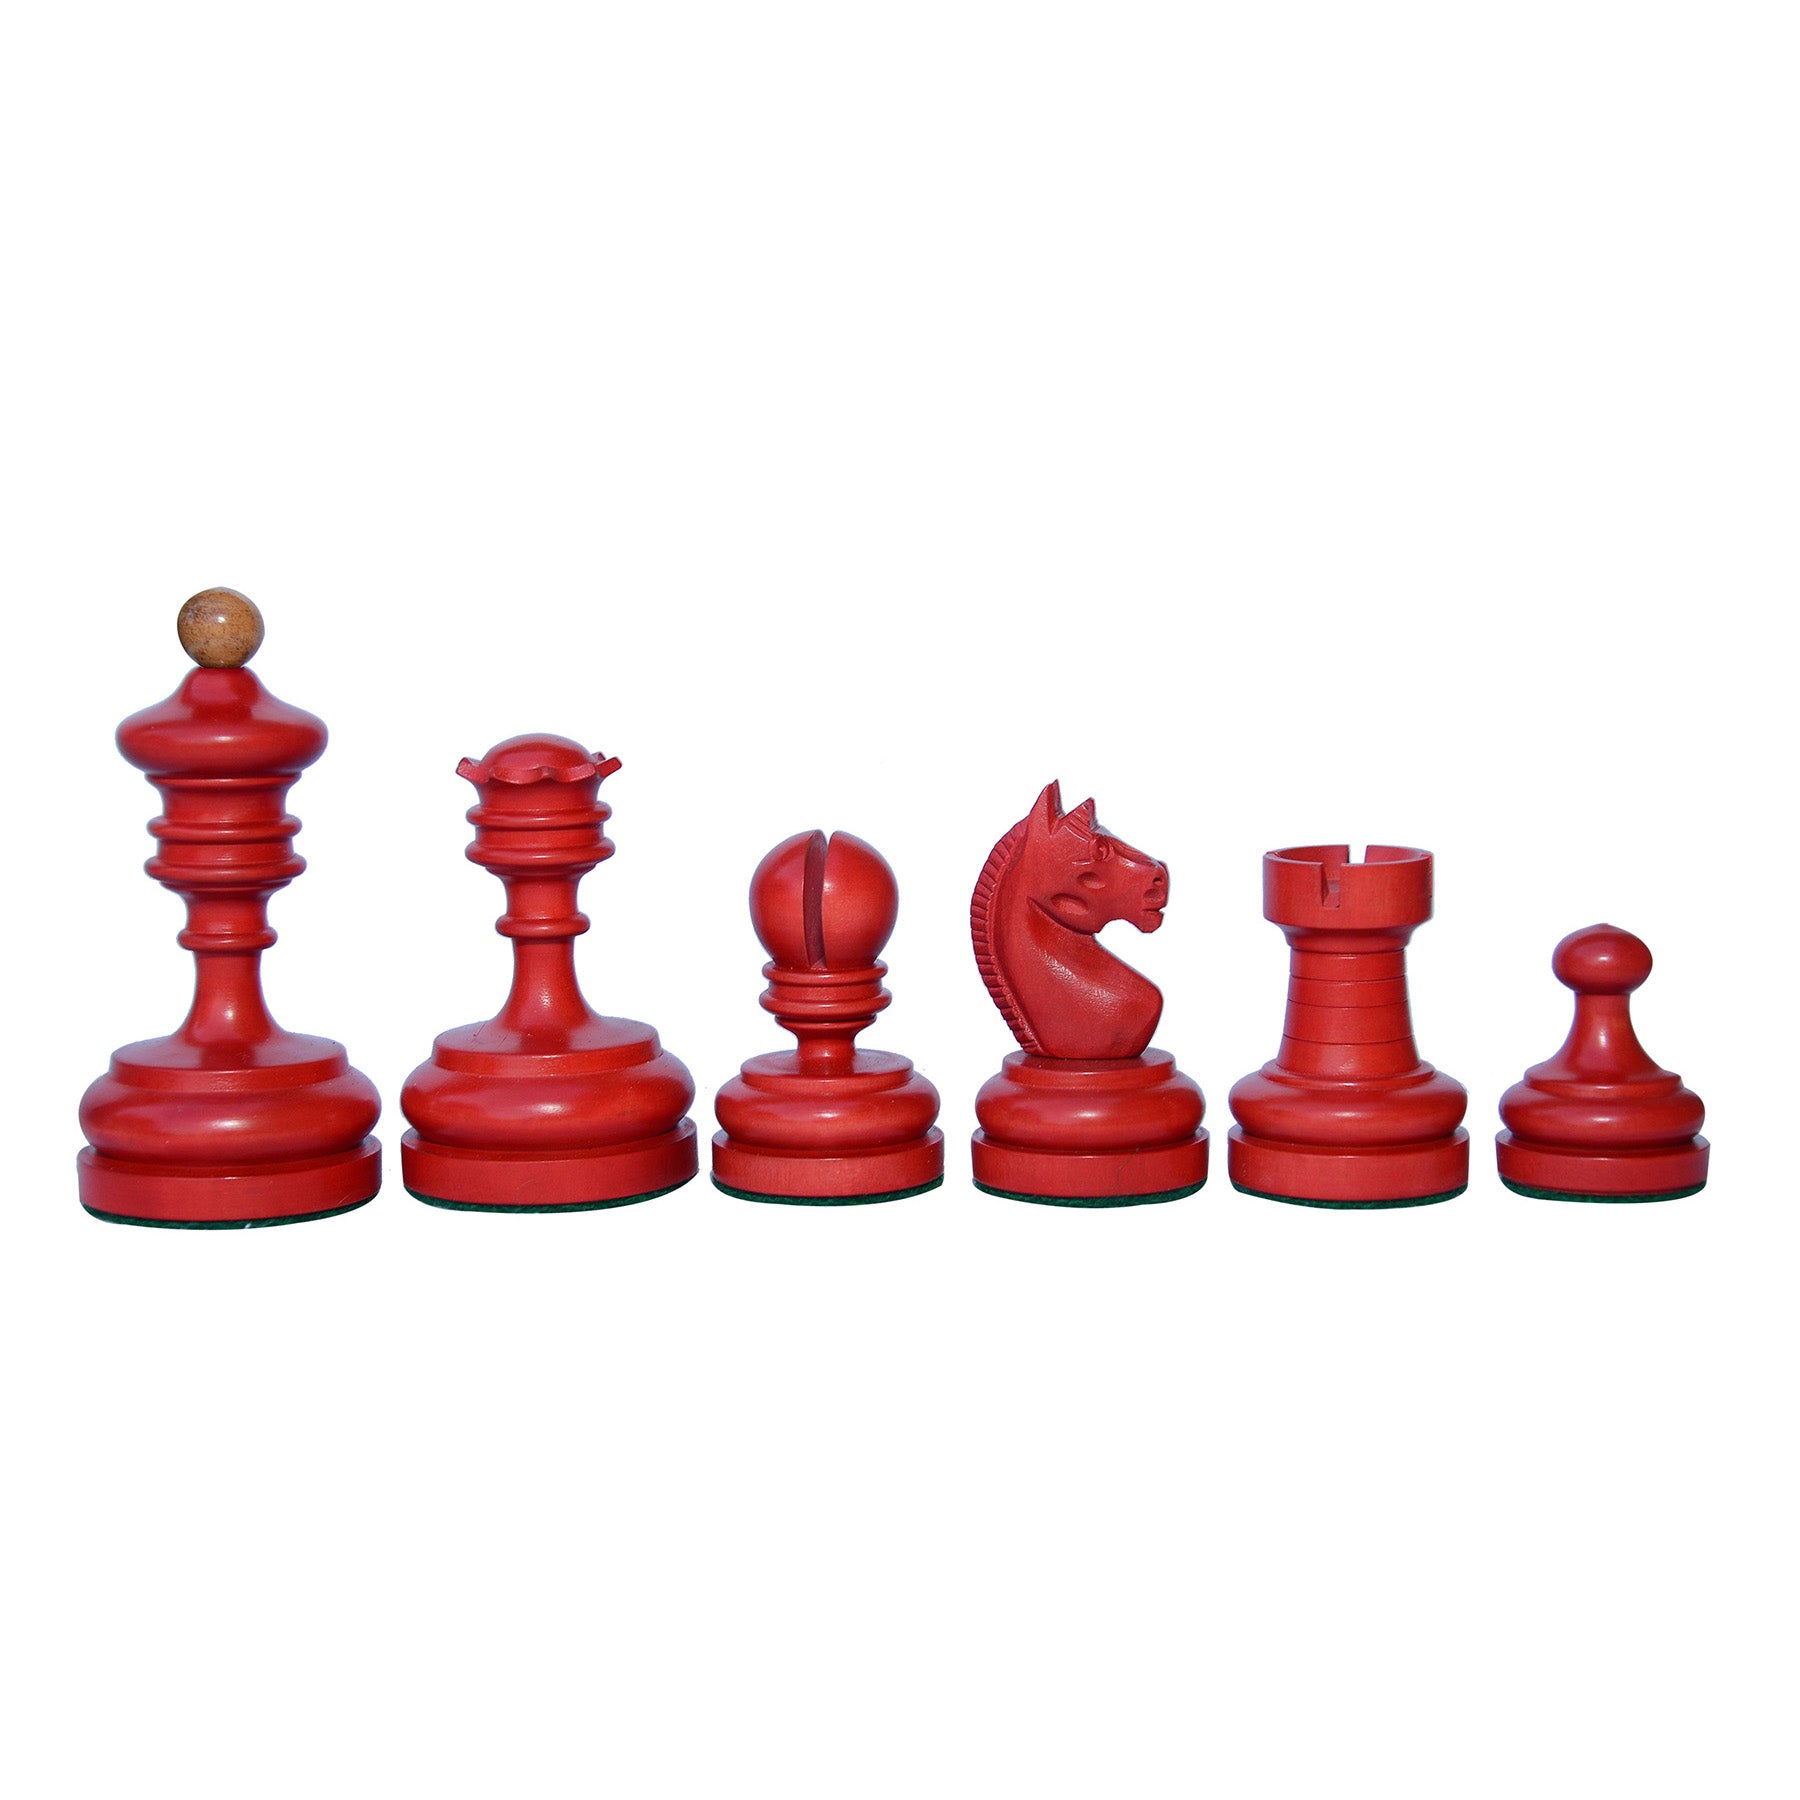 Reproduction Vintage 1930 German Knubbel 3.5" Chess Pieces in Distressed Antique and Red Stained Box wood